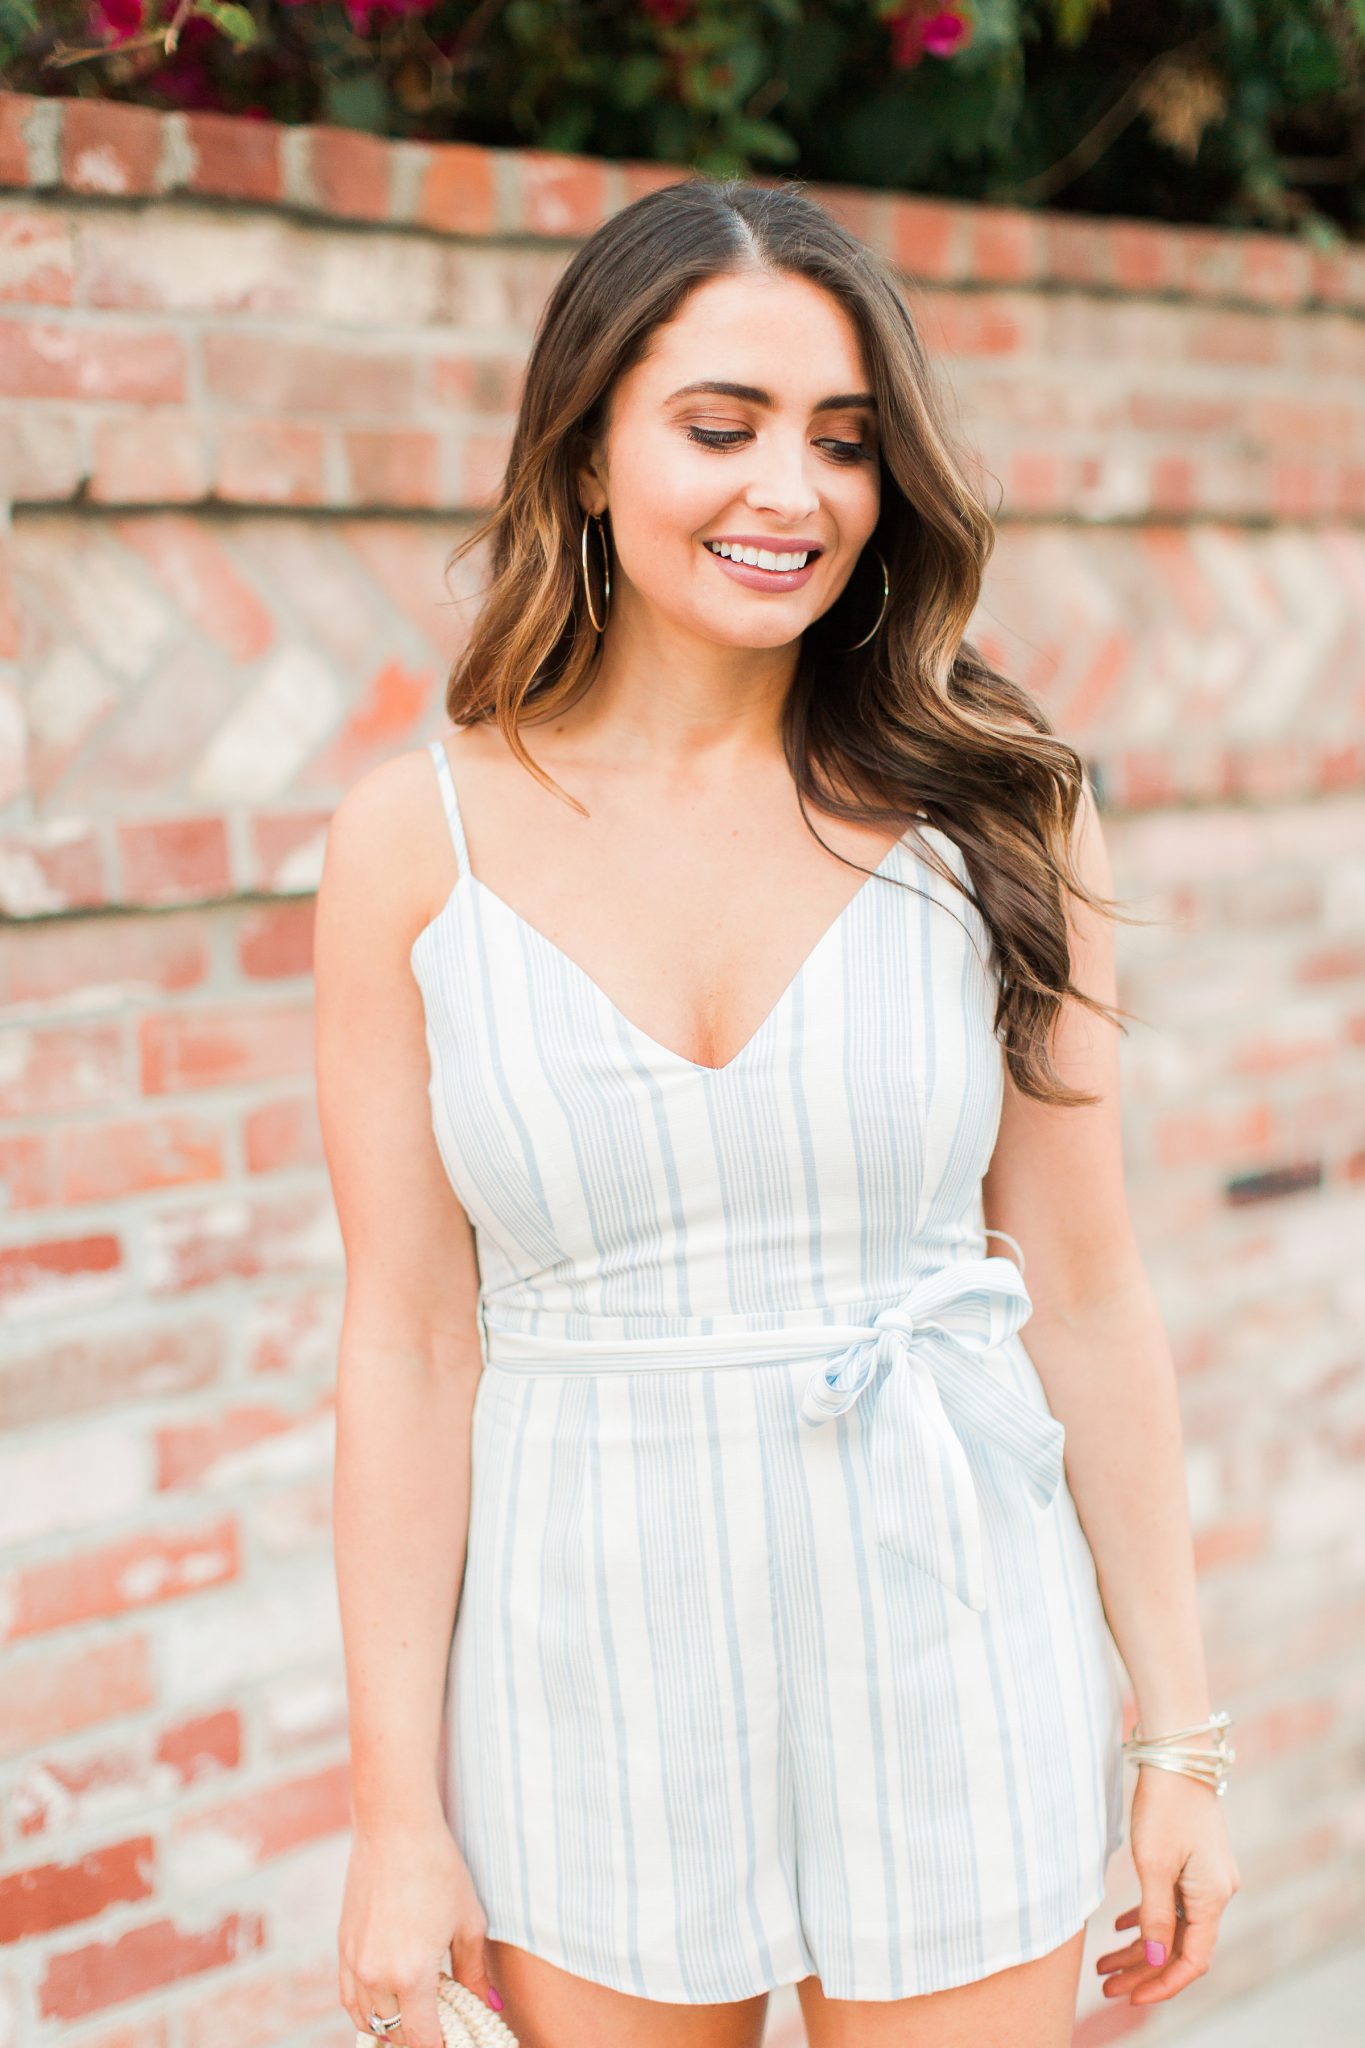 Blue and white REVOLVE striped romper with bow featured by popular Orange County fashion blogger, Maxie Elle